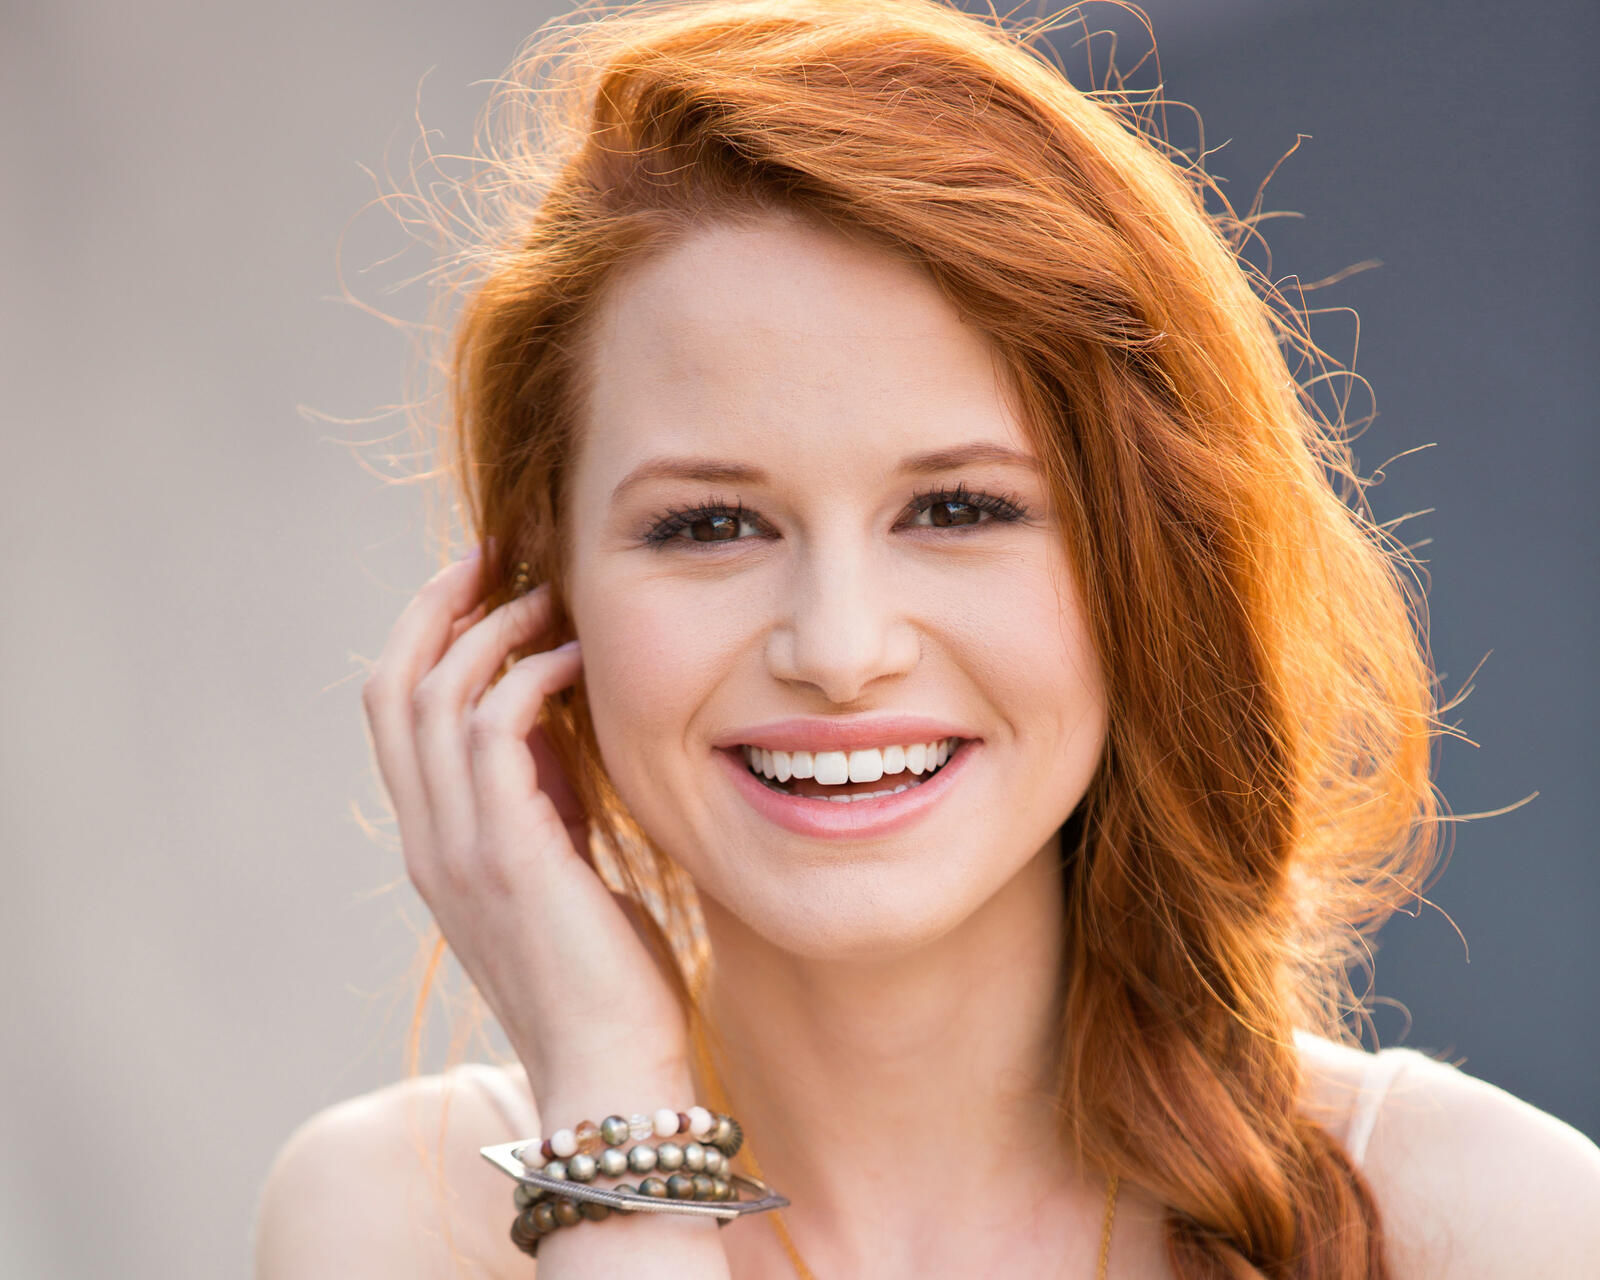 Free photo Madeline Petsch is a redheaded celebrity with a smile on her face